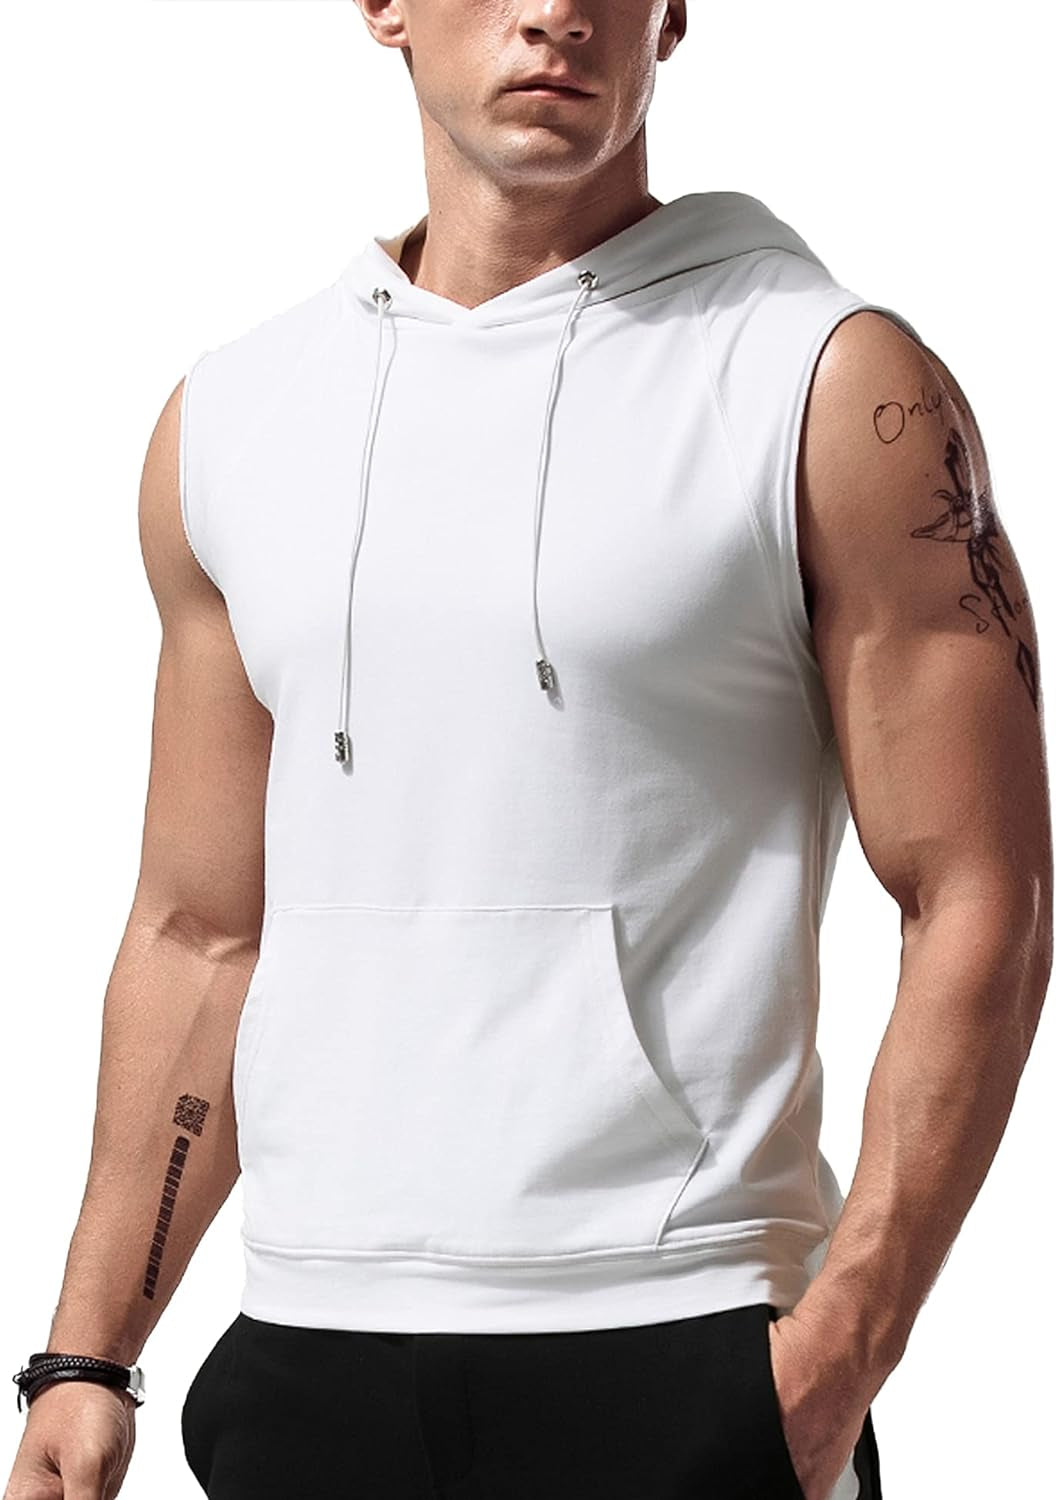 Sleeveless Hoodie Men Workout Hooded Tank Top Gym Muscle Shirts with Pocket